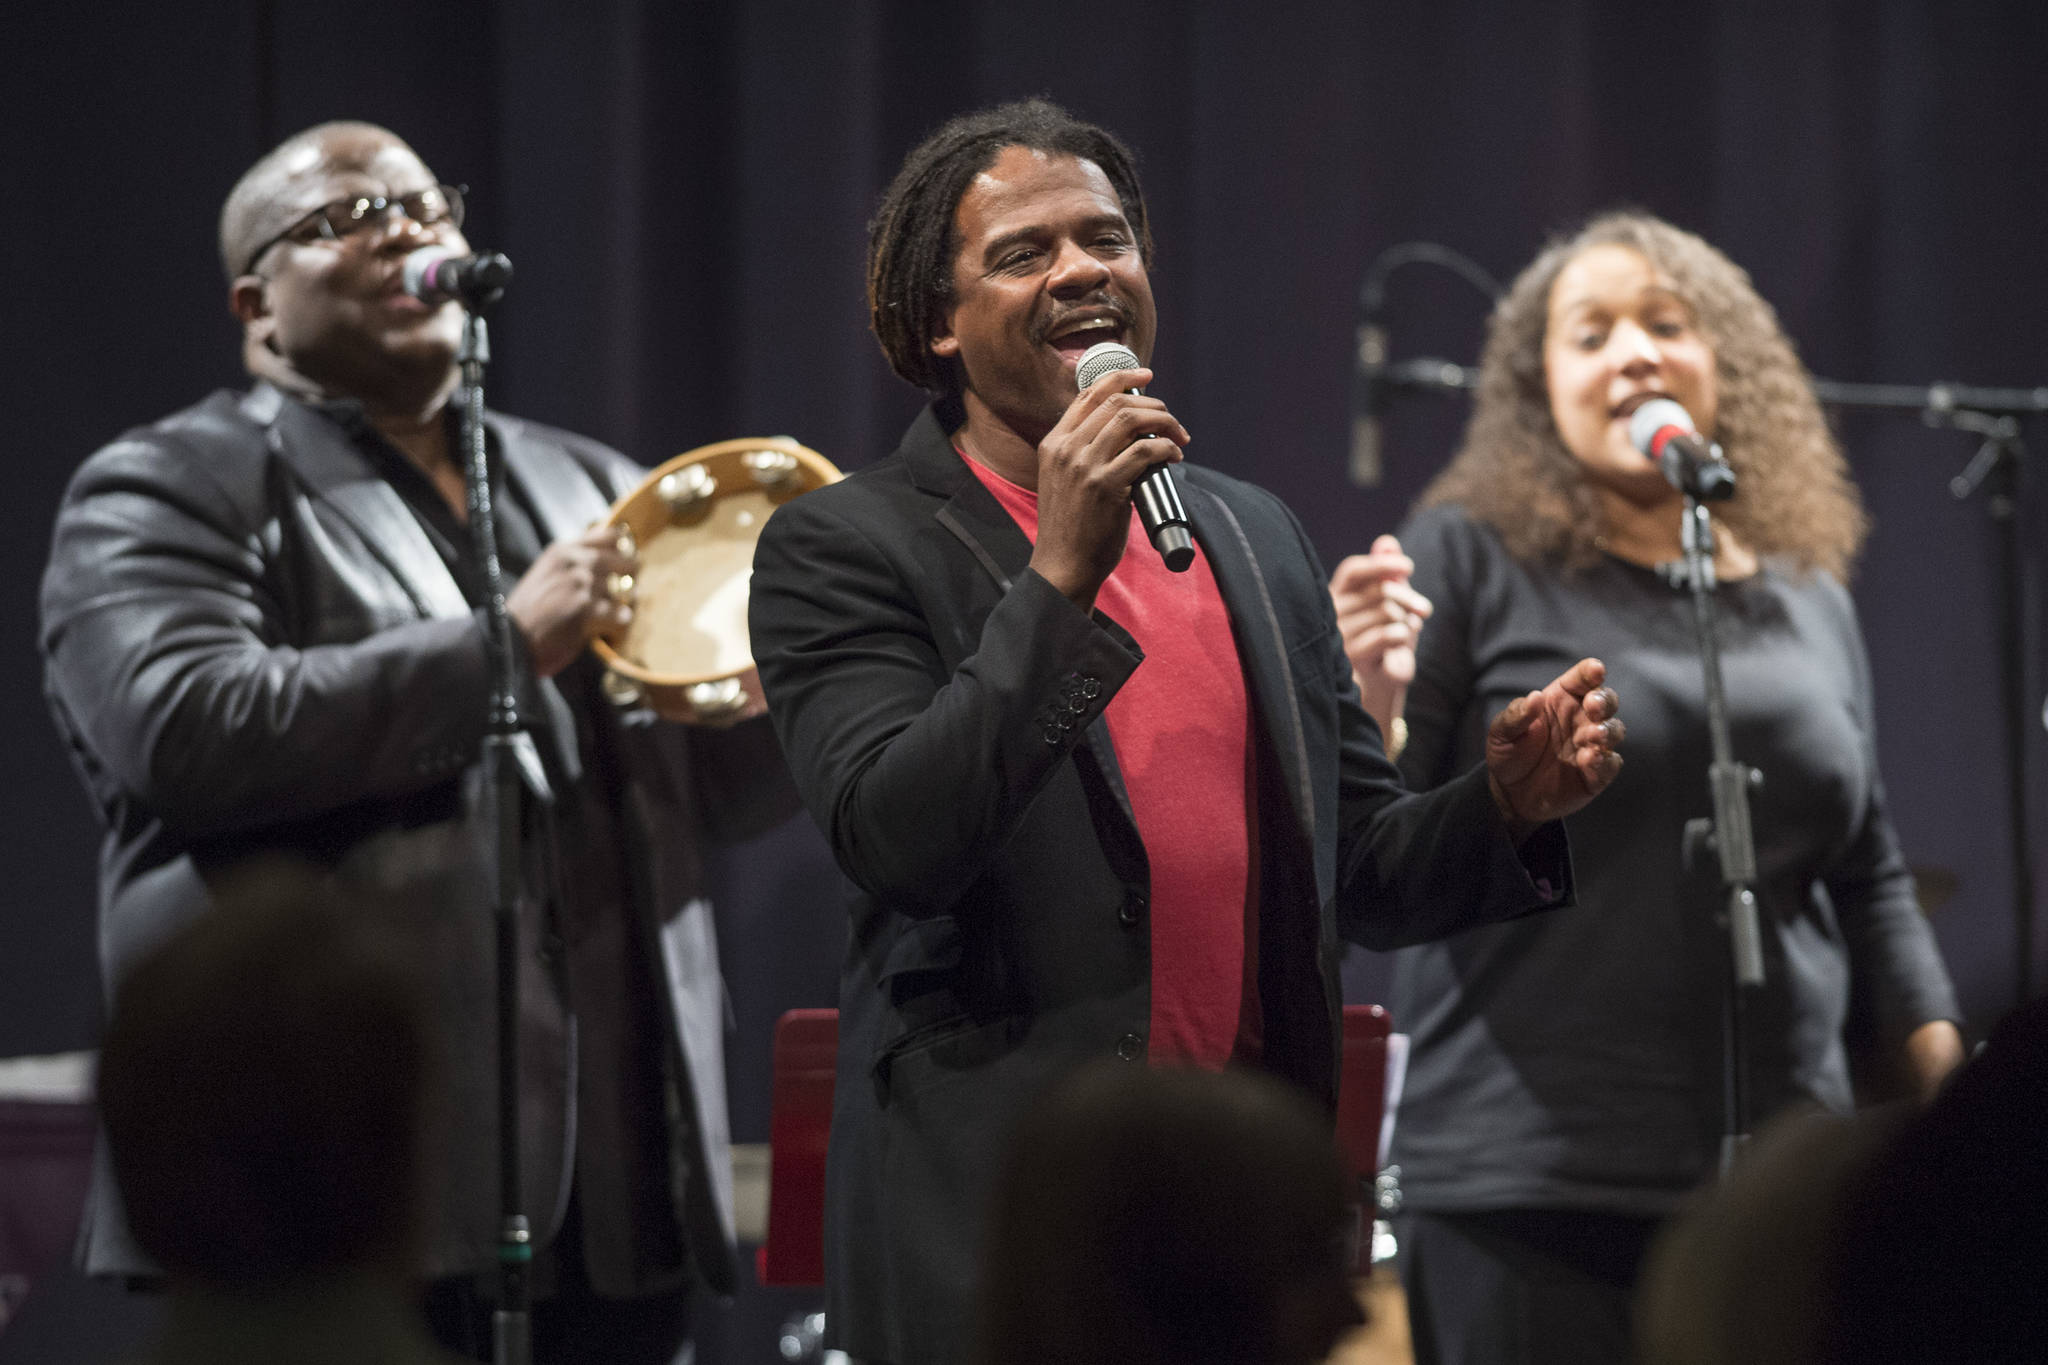 Ryan Shaw, center, sings with Bobby Lewis, left, and Jaunelle Celaire during the performance of “Motown for Our Town” at the Juneau Arts & Culture Center on Friday, March 1, 2019. (Michael Penn | Juneau Empire)